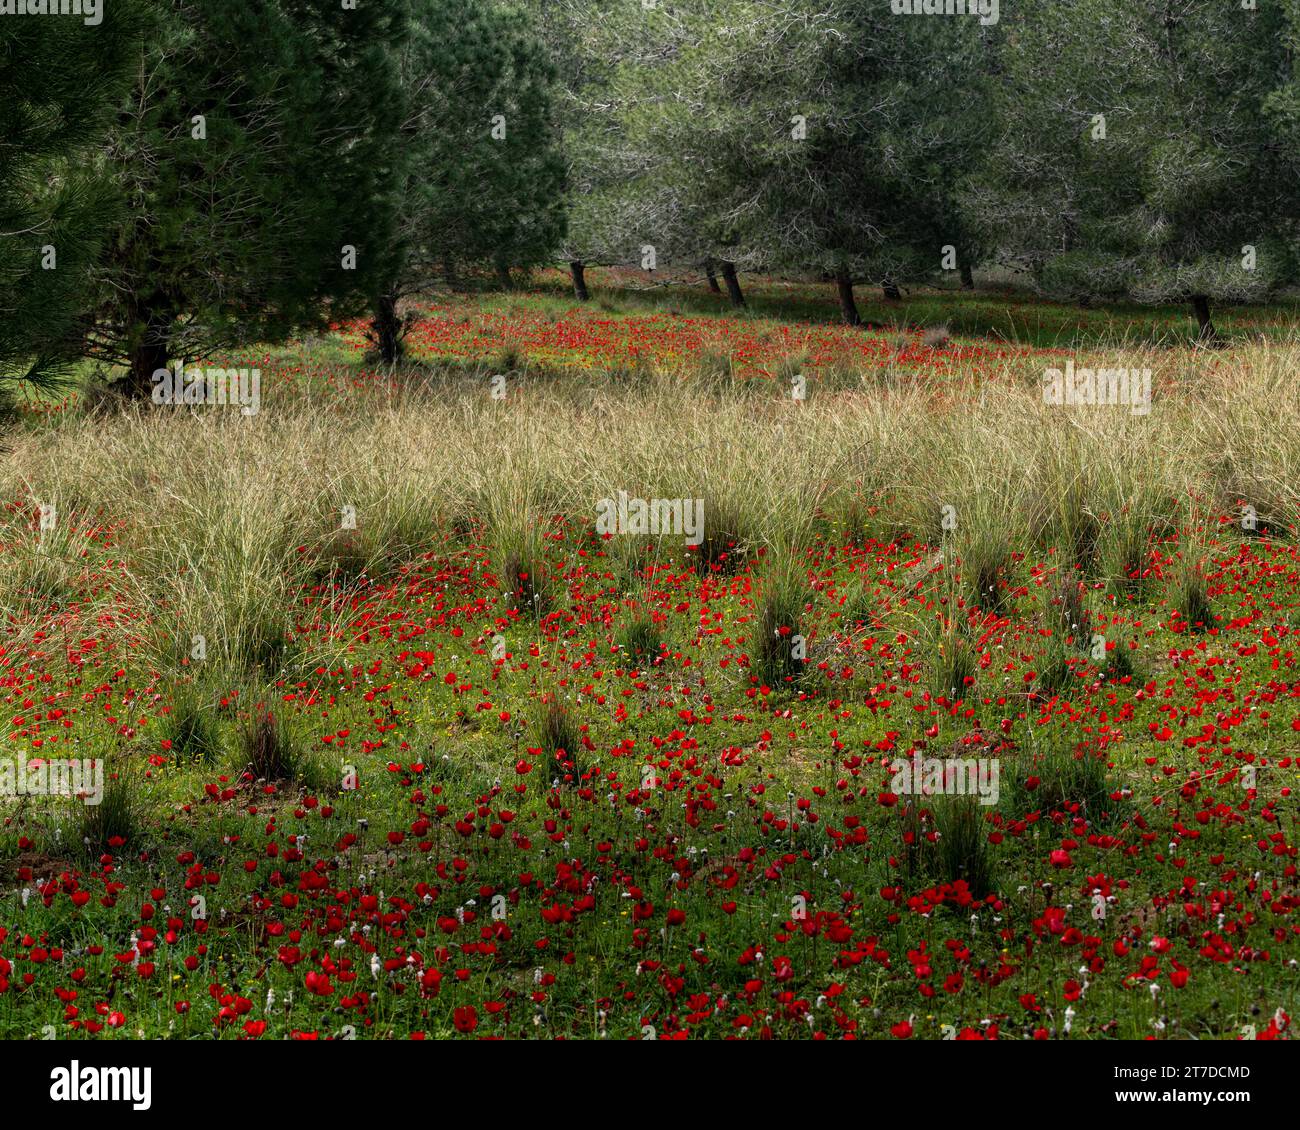 A field of red, spring anemone wildflowers on he outskirts of an evergreen forest in southern Israel. Stock Photo